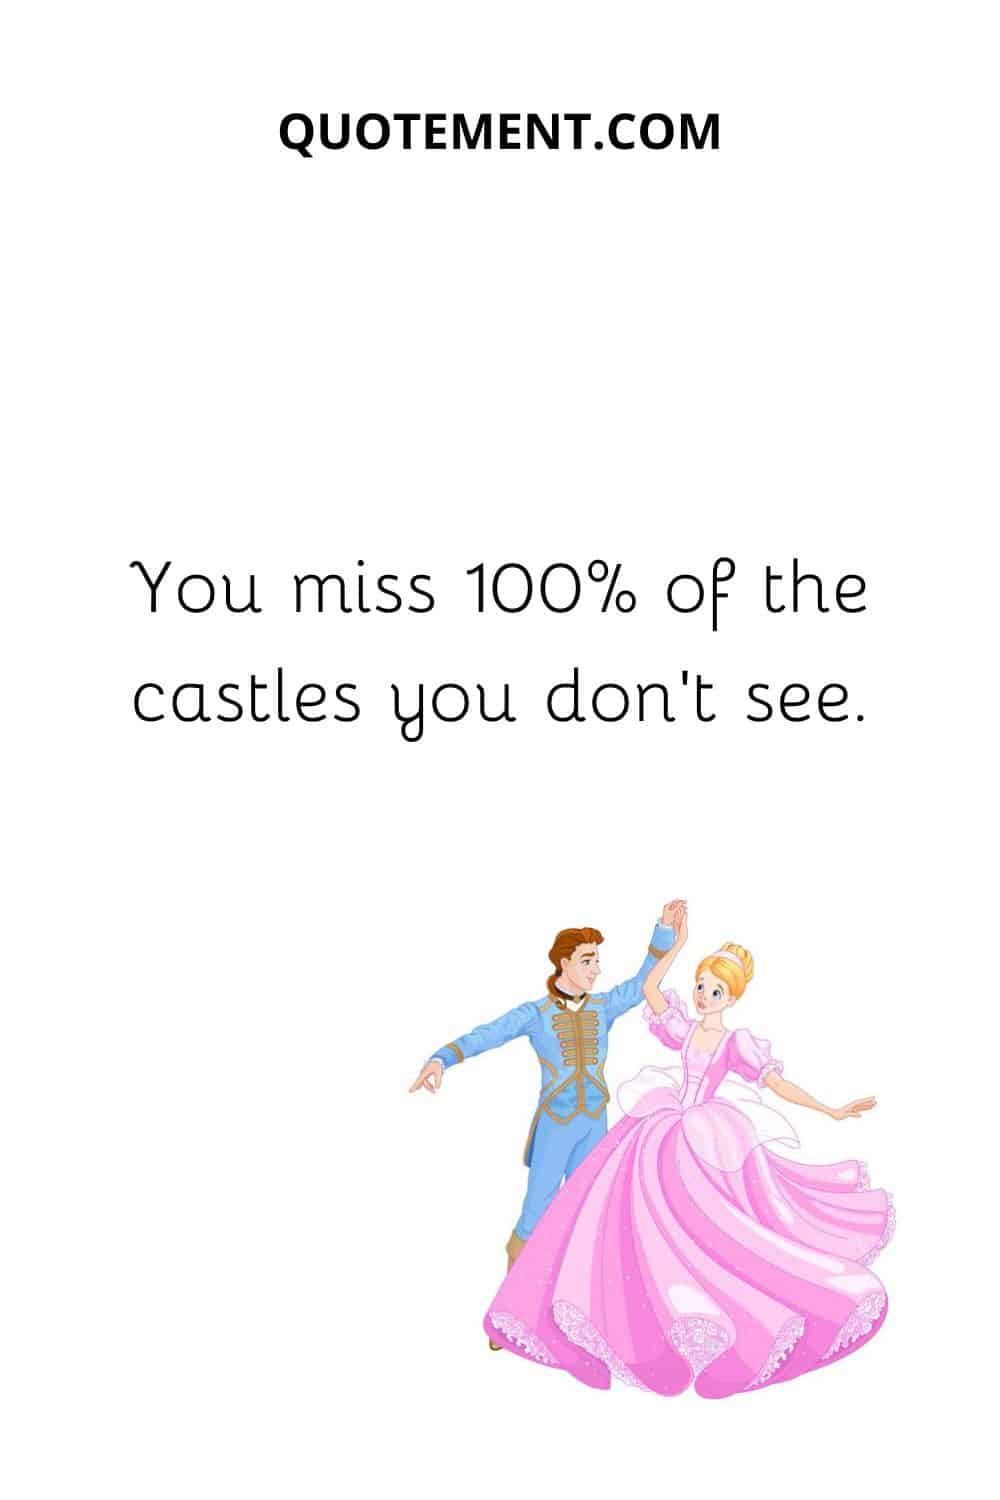 You miss 100% of the castles you don’t see